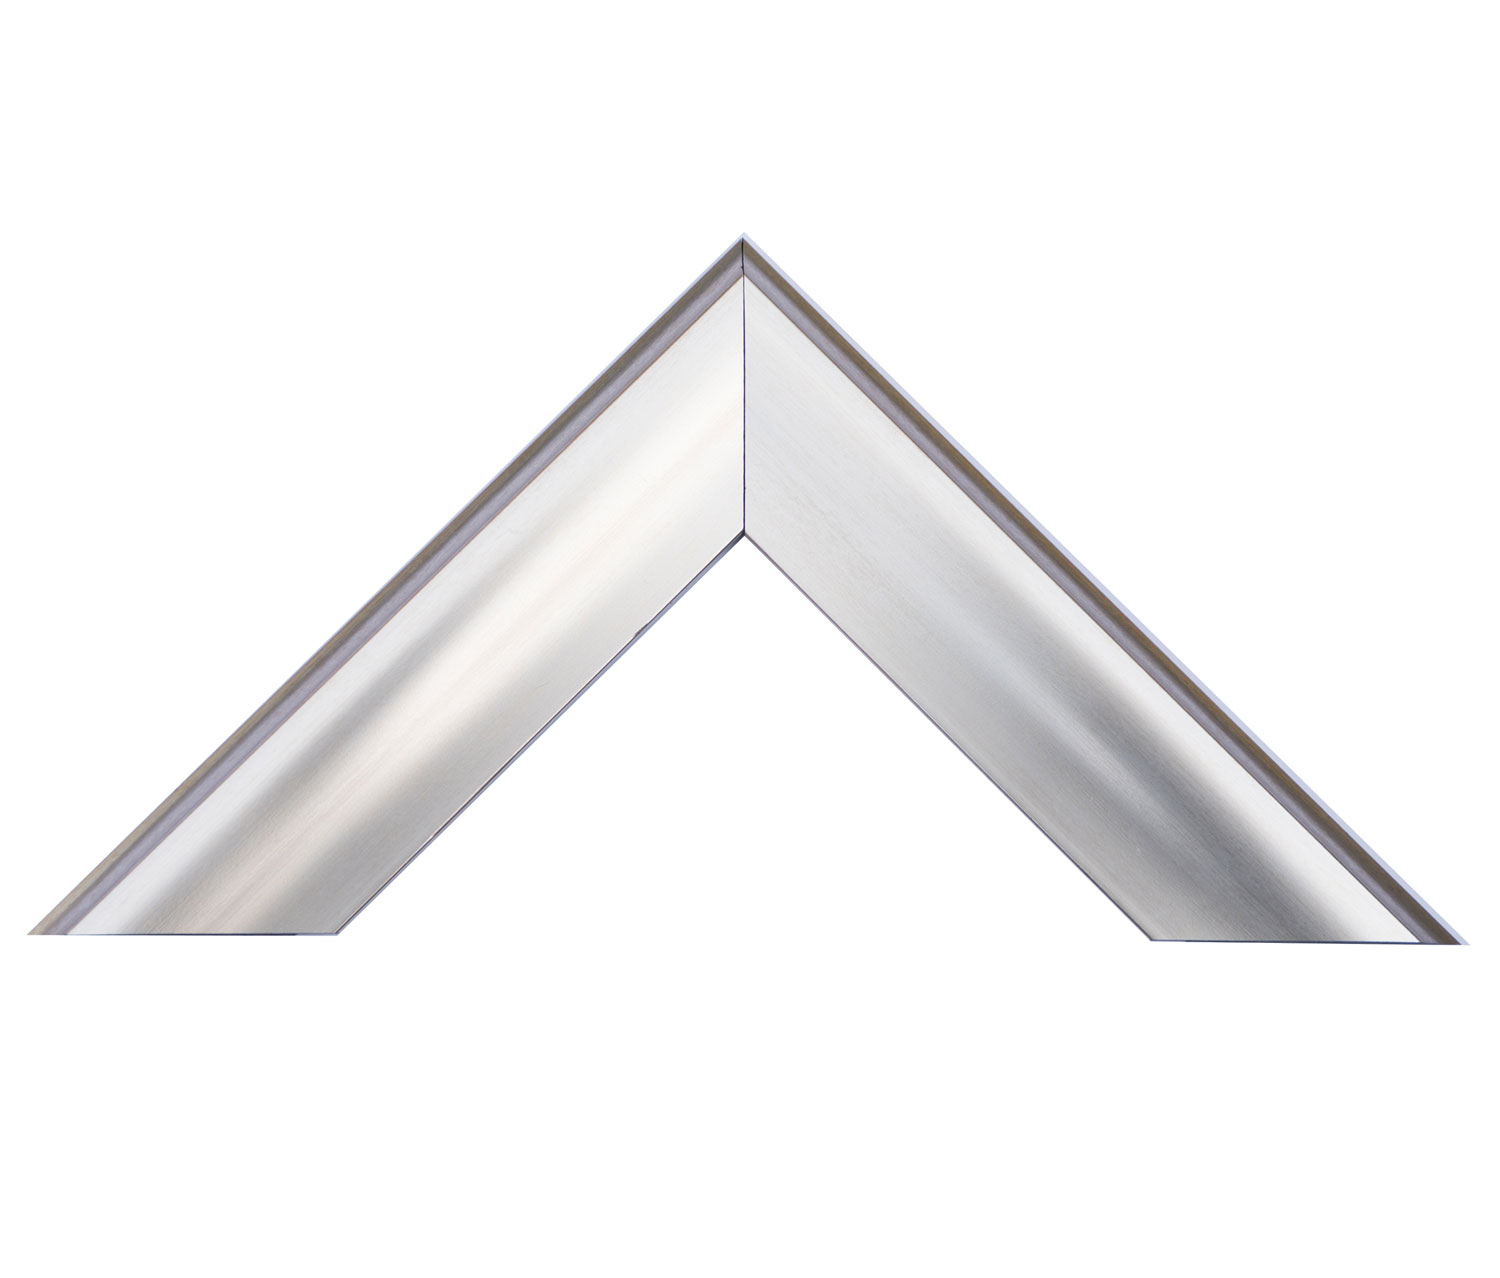 7400S rounded mirror frame. Silver color.